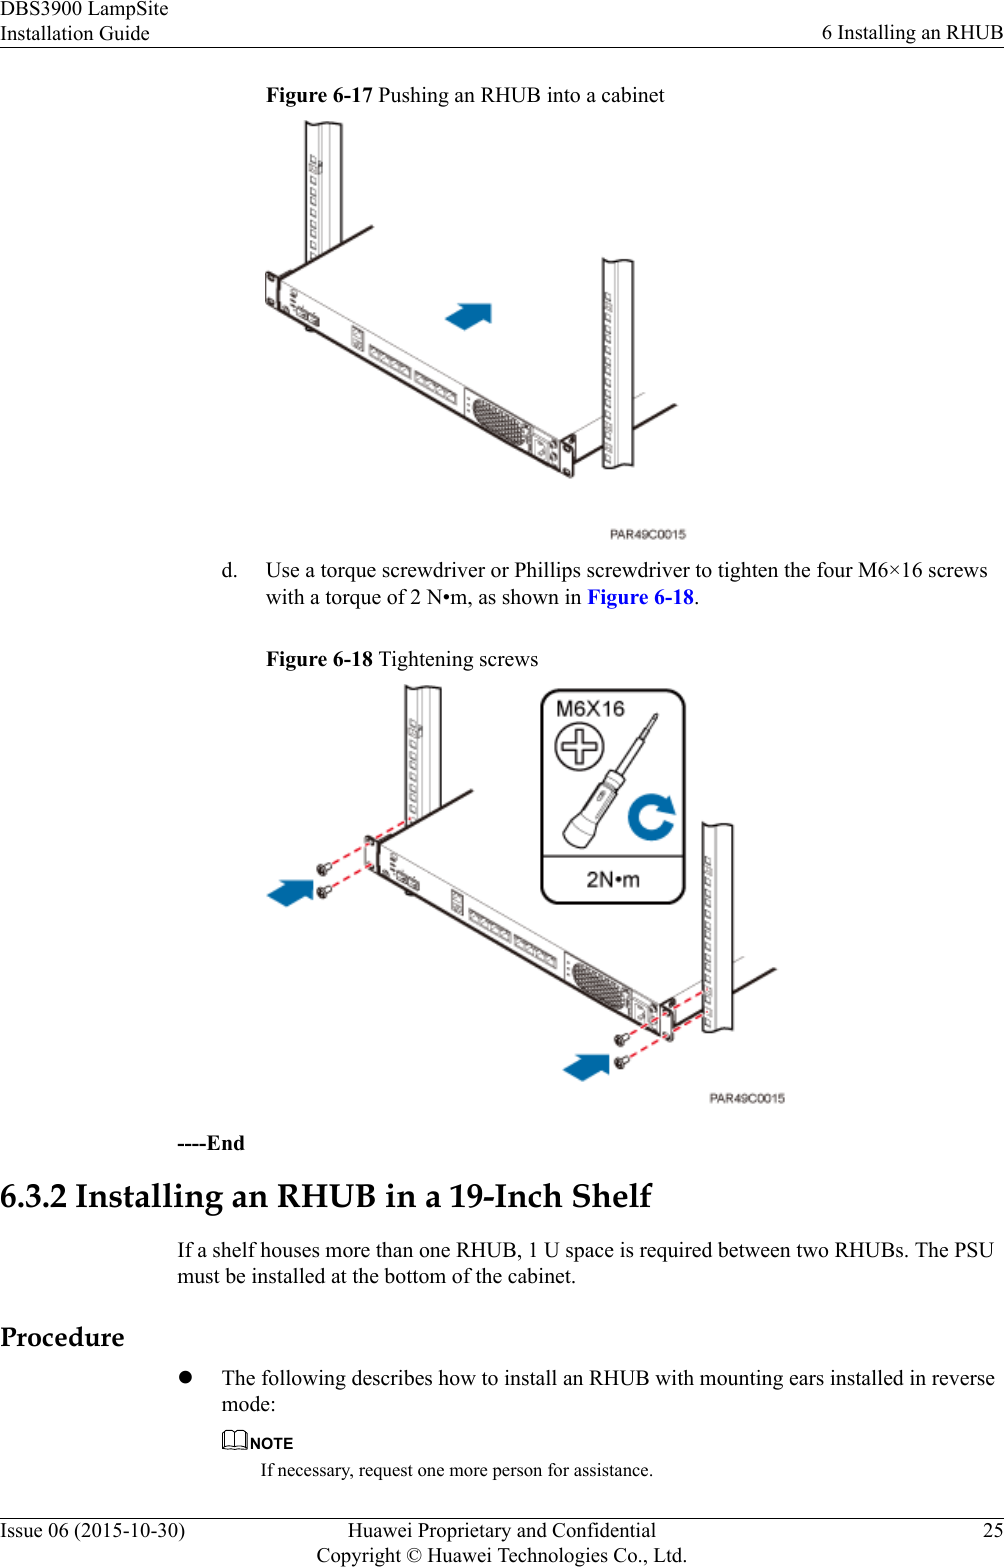 Figure 6-17 Pushing an RHUB into a cabinetd. Use a torque screwdriver or Phillips screwdriver to tighten the four M6×16 screwswith a torque of 2 N•m, as shown in Figure 6-18.Figure 6-18 Tightening screws----End6.3.2 Installing an RHUB in a 19-Inch ShelfIf a shelf houses more than one RHUB, 1 U space is required between two RHUBs. The PSUmust be installed at the bottom of the cabinet.ProcedurelThe following describes how to install an RHUB with mounting ears installed in reversemode:NOTEIf necessary, request one more person for assistance.DBS3900 LampSiteInstallation Guide 6 Installing an RHUBIssue 06 (2015-10-30) Huawei Proprietary and ConfidentialCopyright © Huawei Technologies Co., Ltd.25